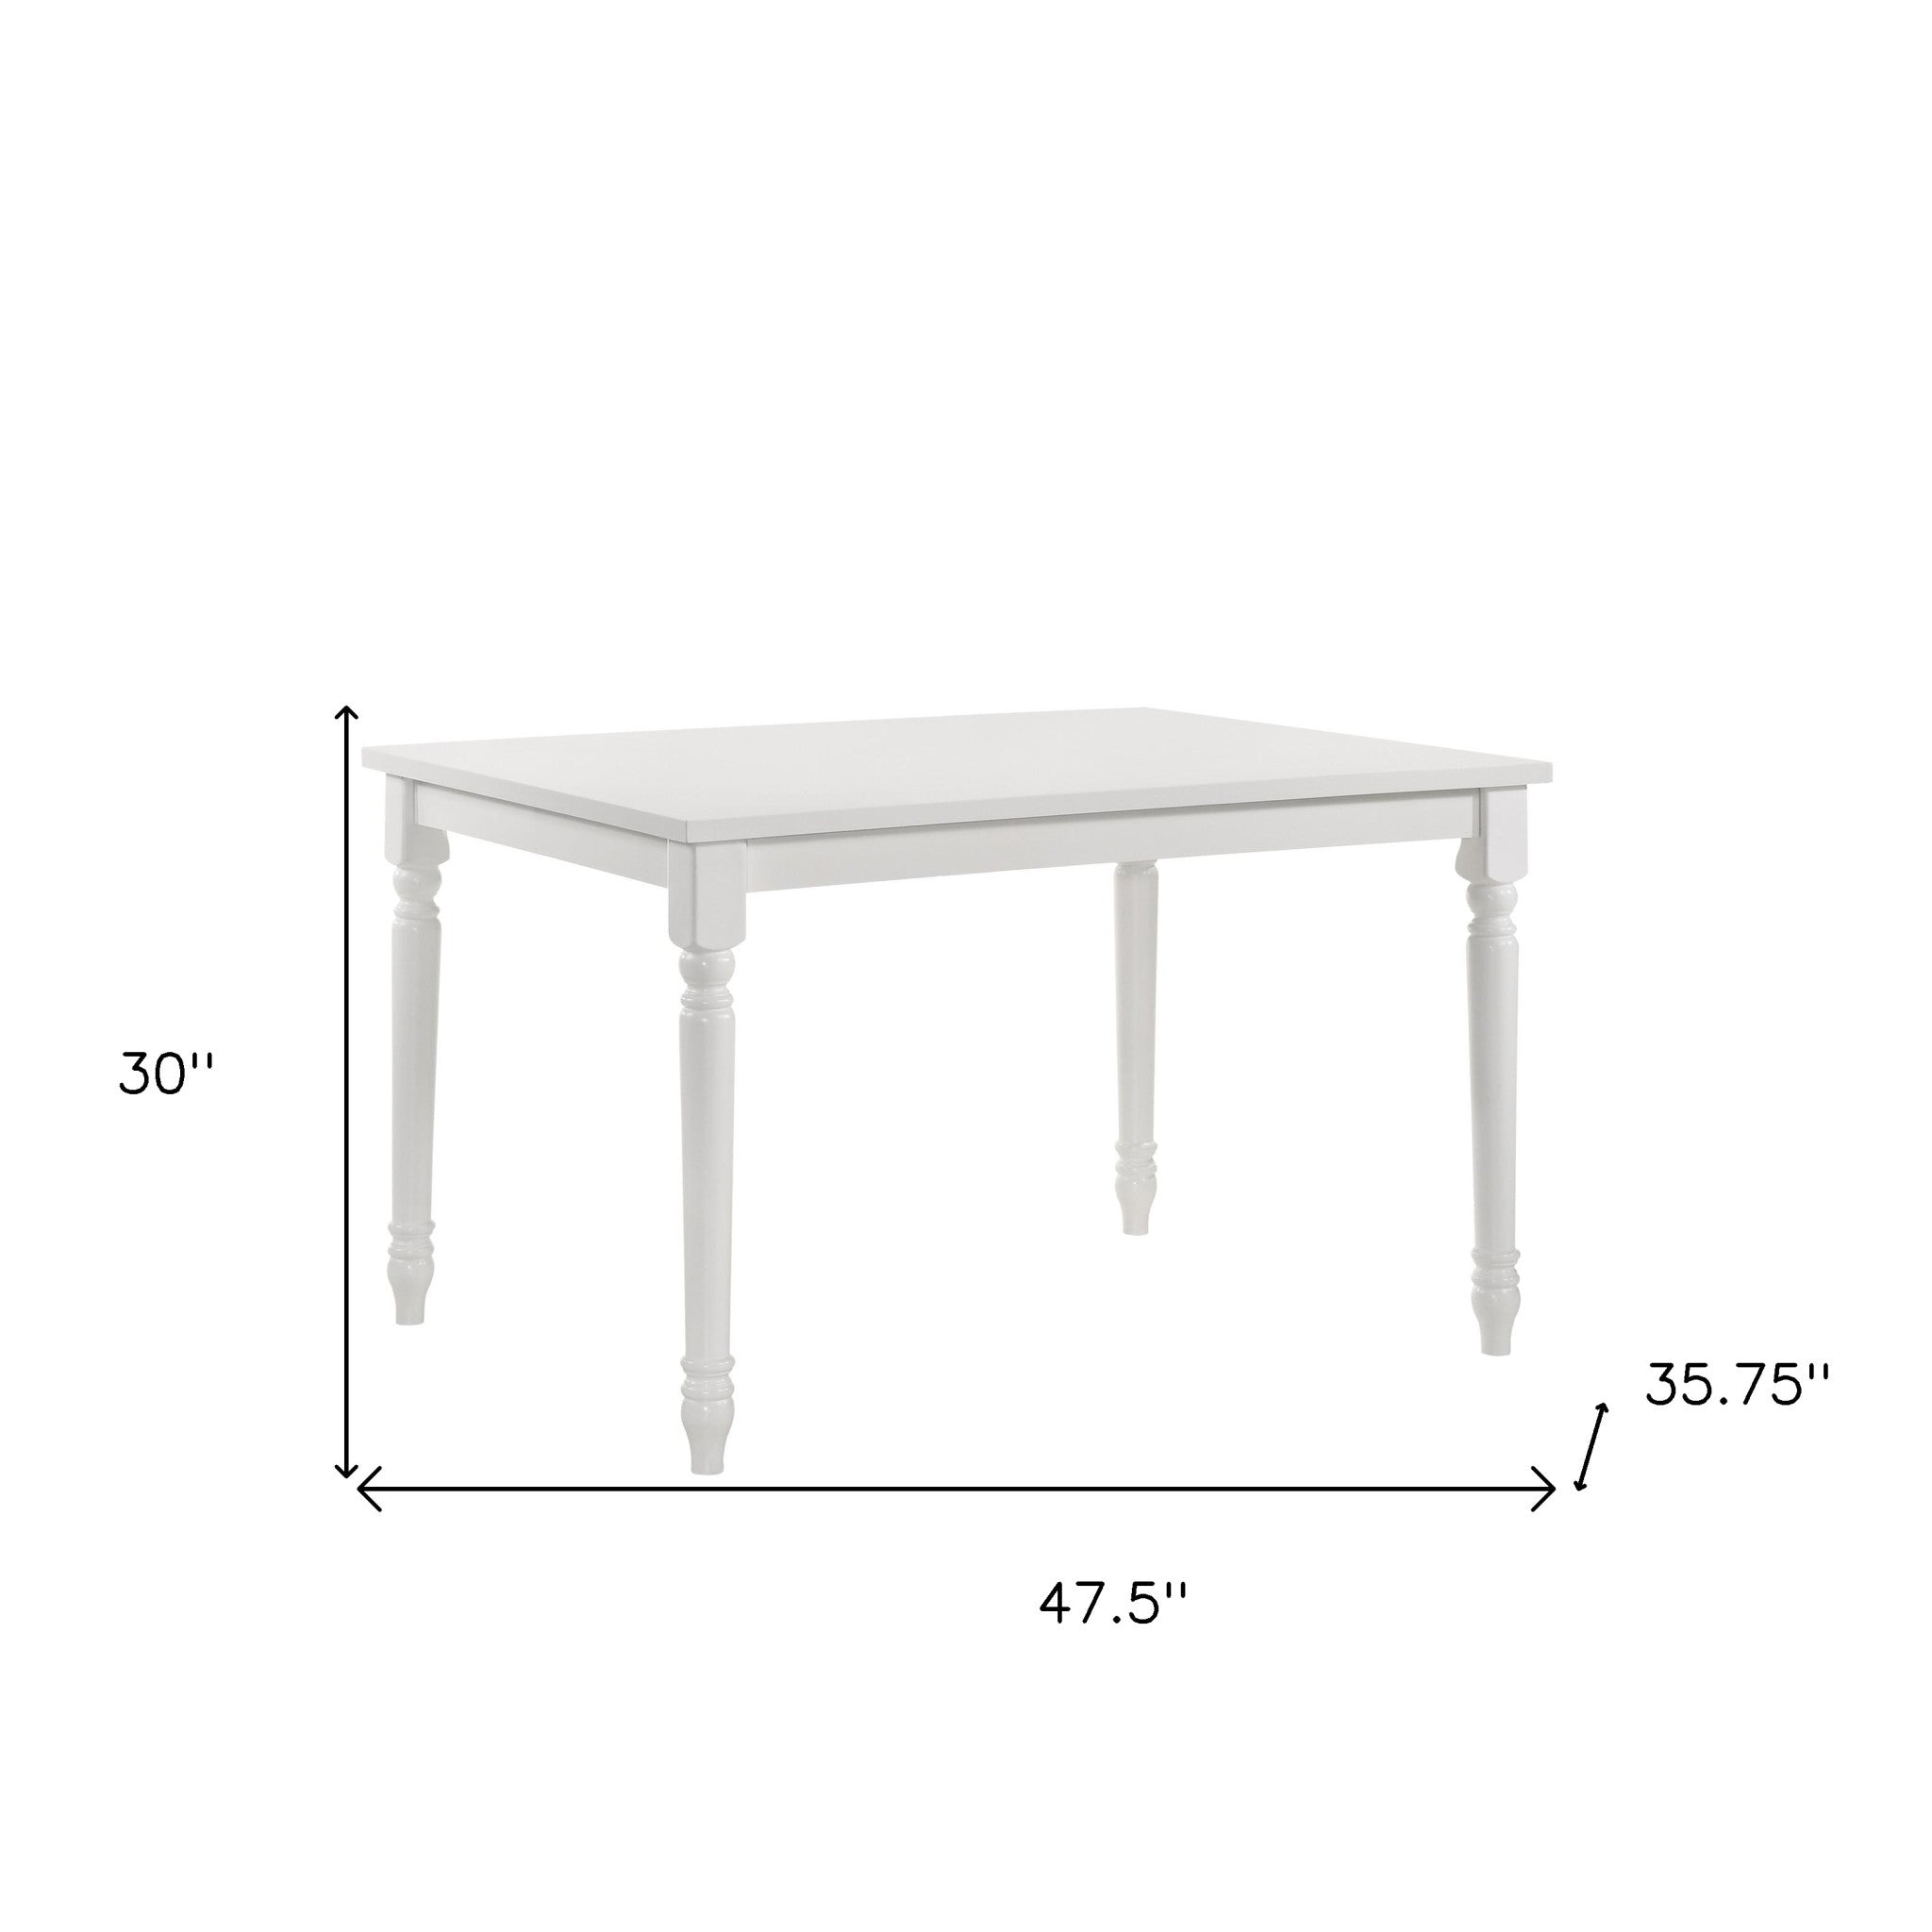 48" White Solid Wood Dining Table